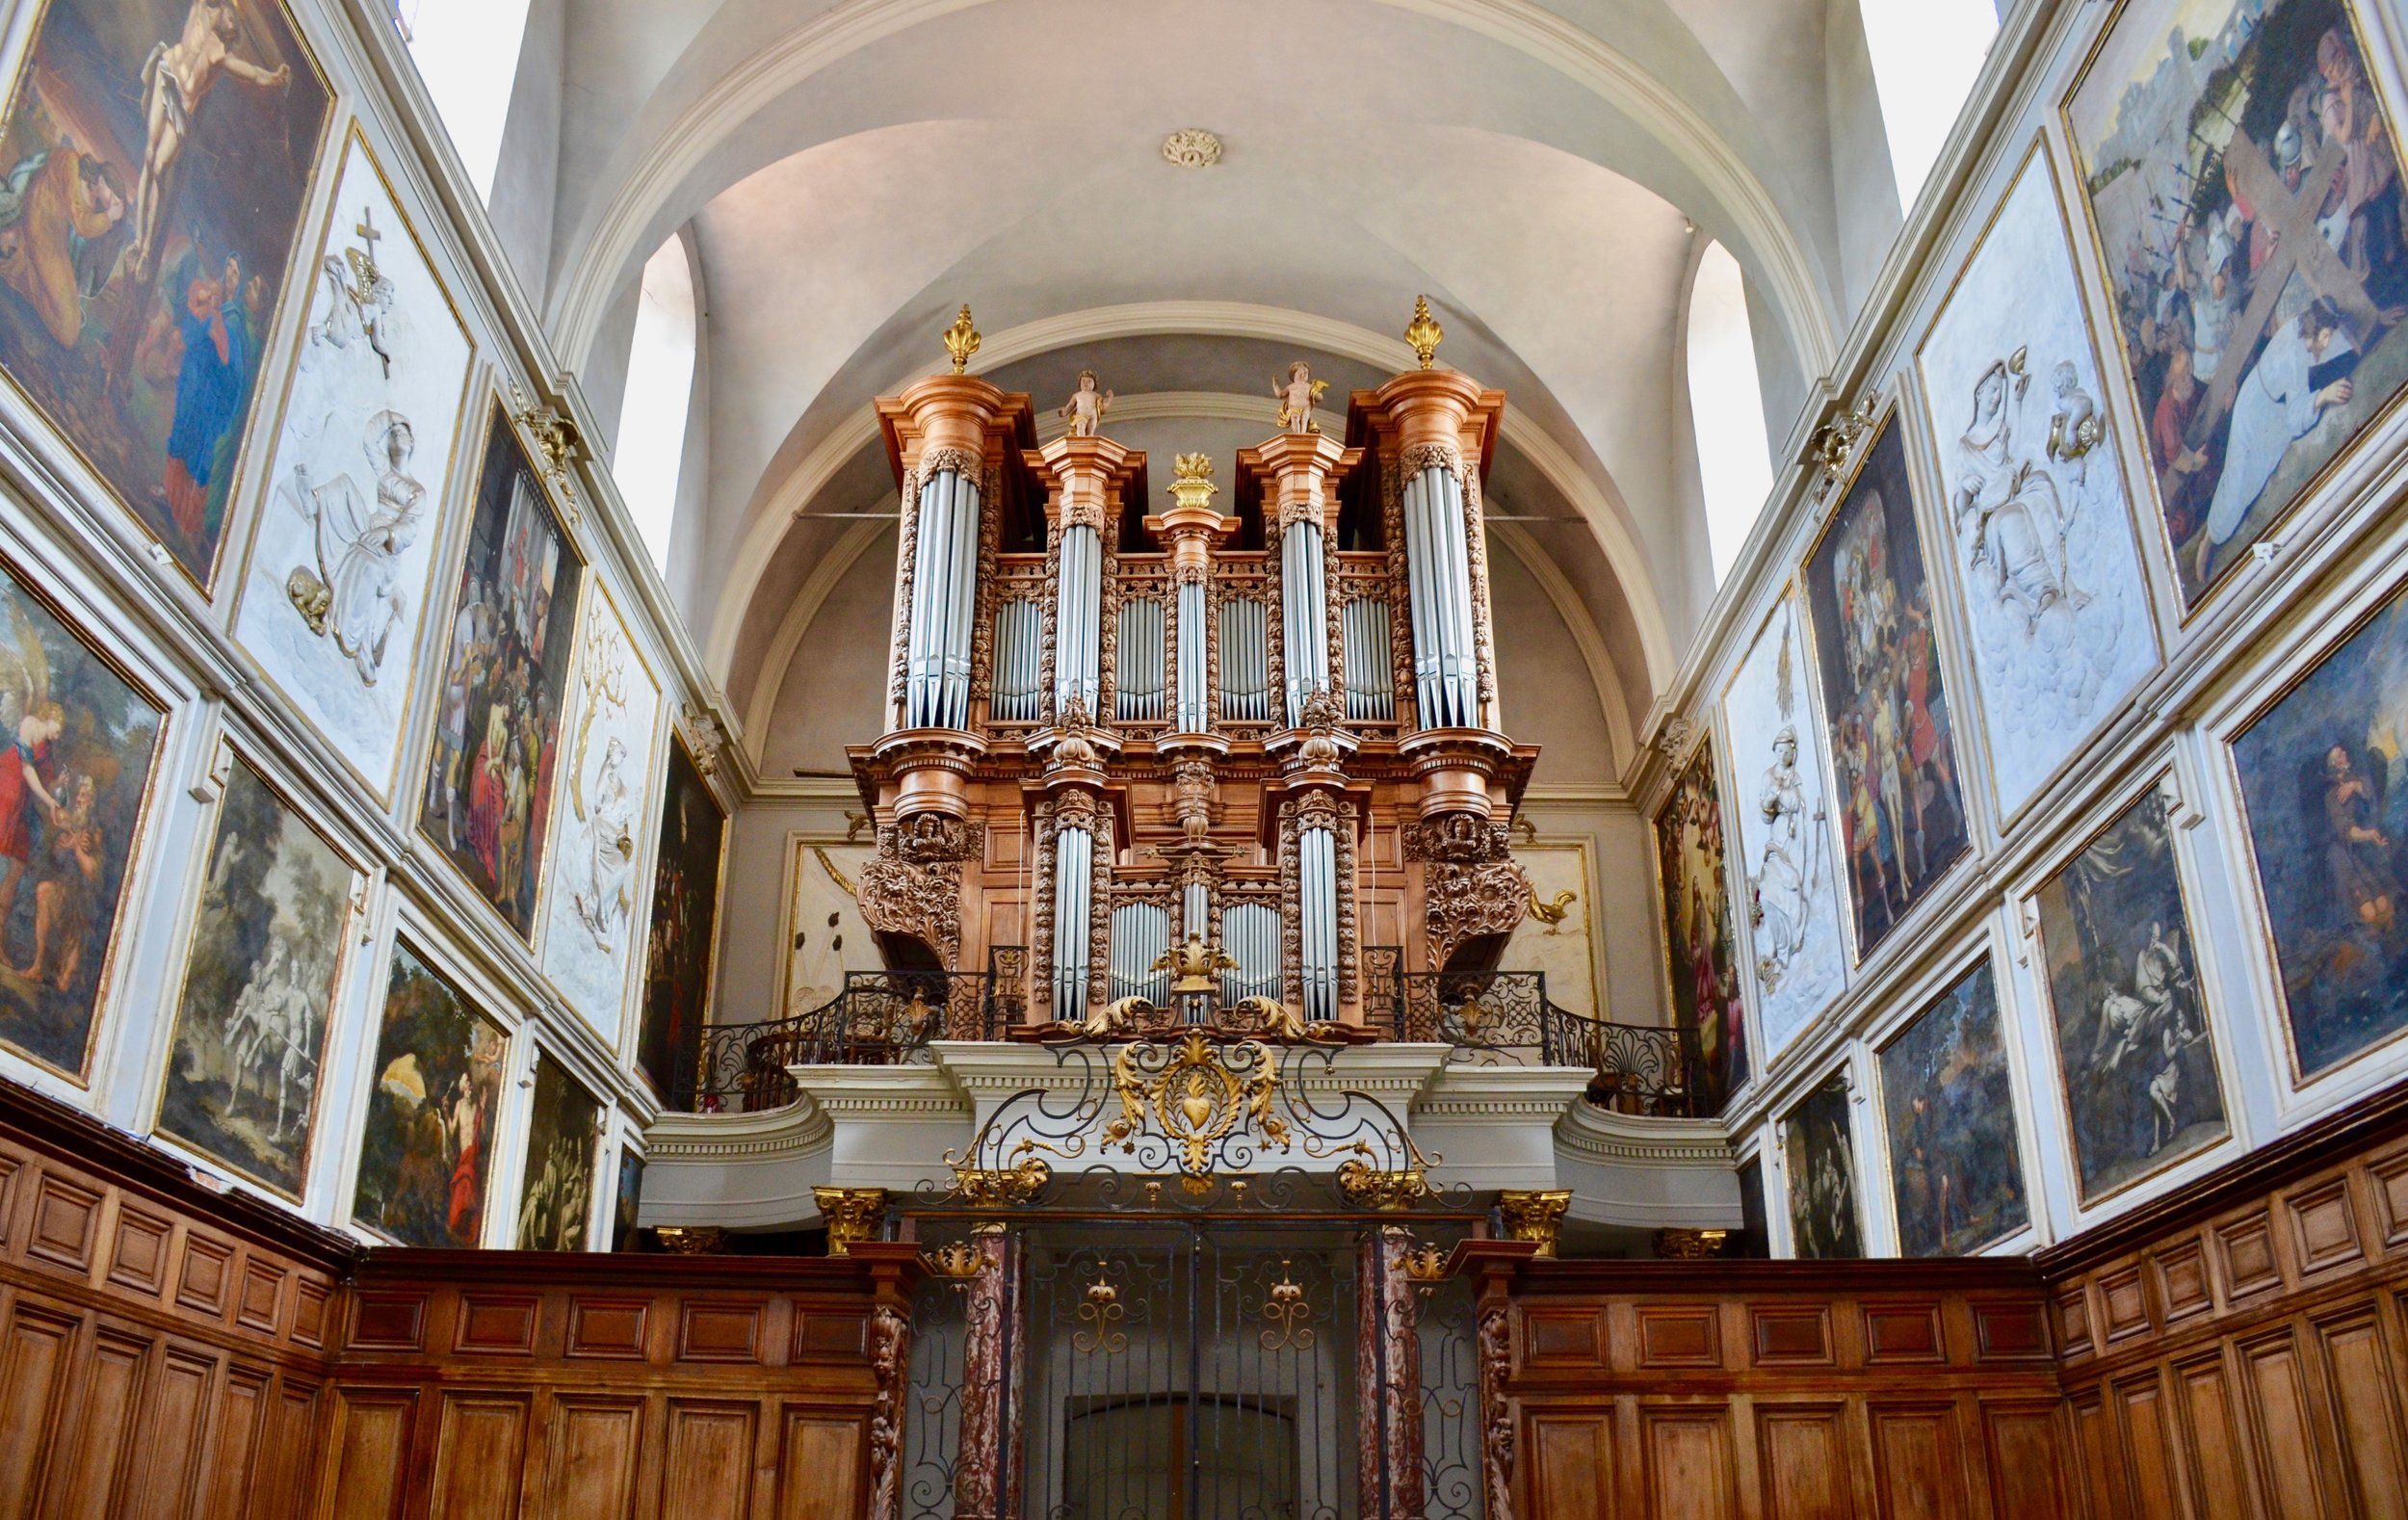 The Delaunay (1683)/Micot (1783) organ in St Pierre des Chartreux, Toulouse